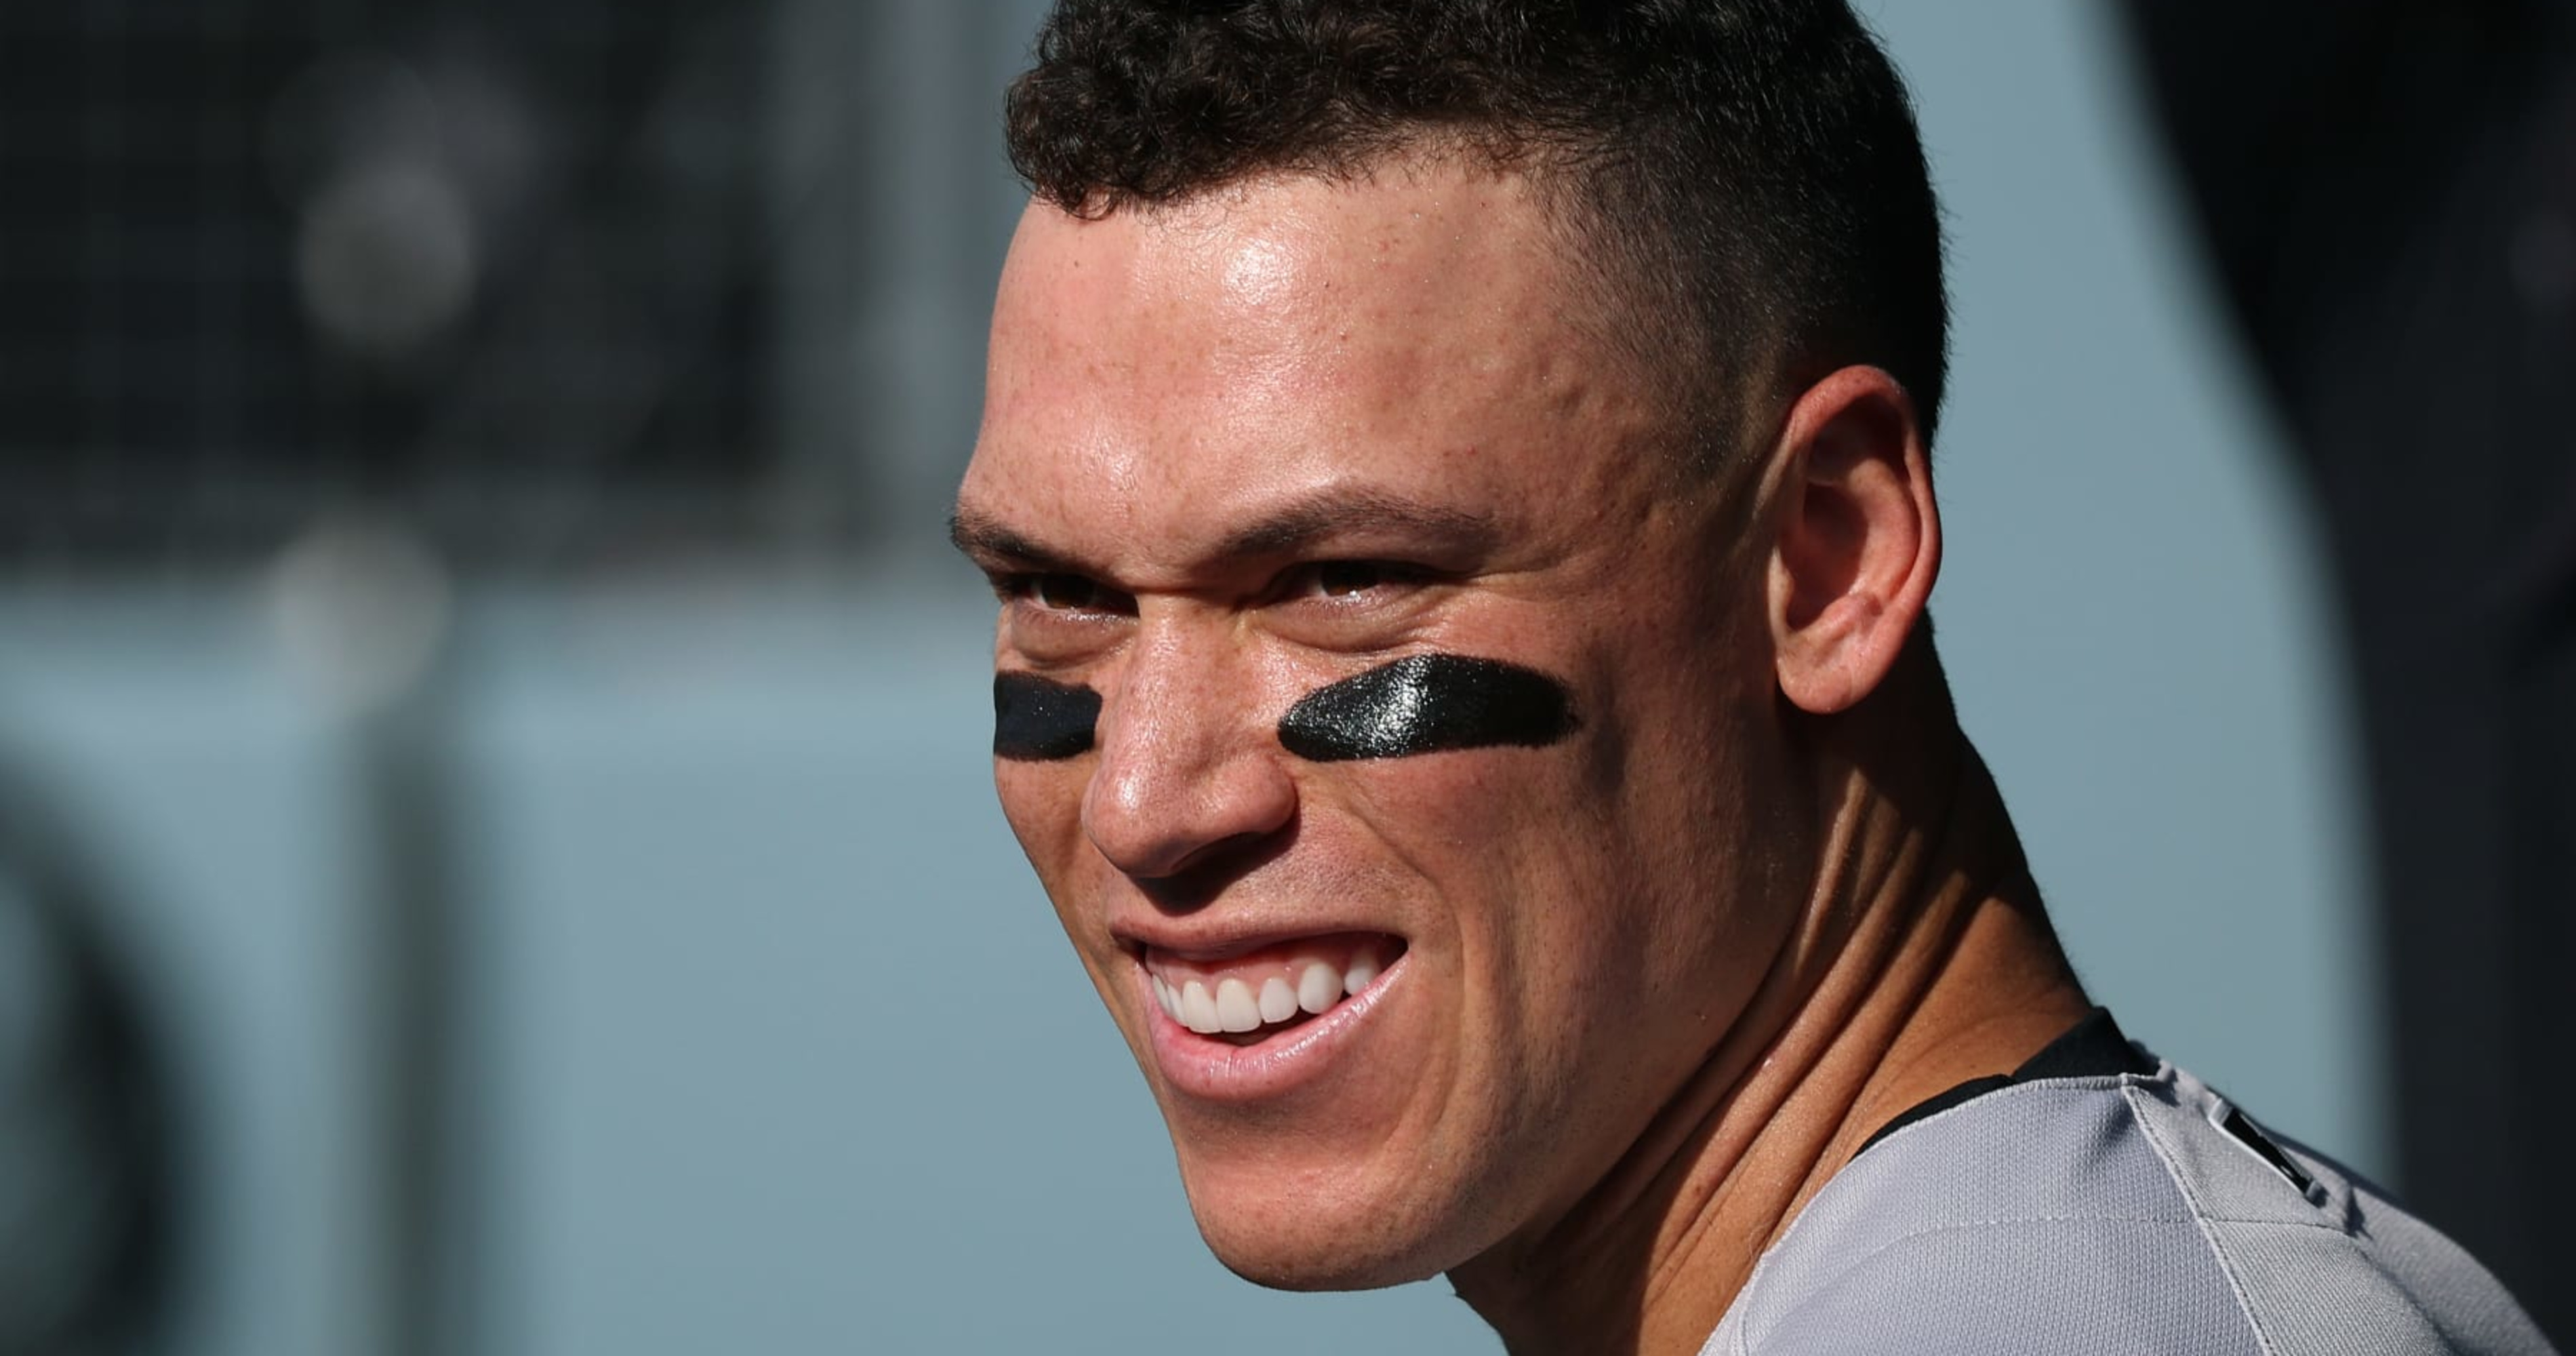 Dodgers News: Aaron Judge Was Asked if He Might Sue Dodger Org Over Toe  Injury - Inside the Dodgers